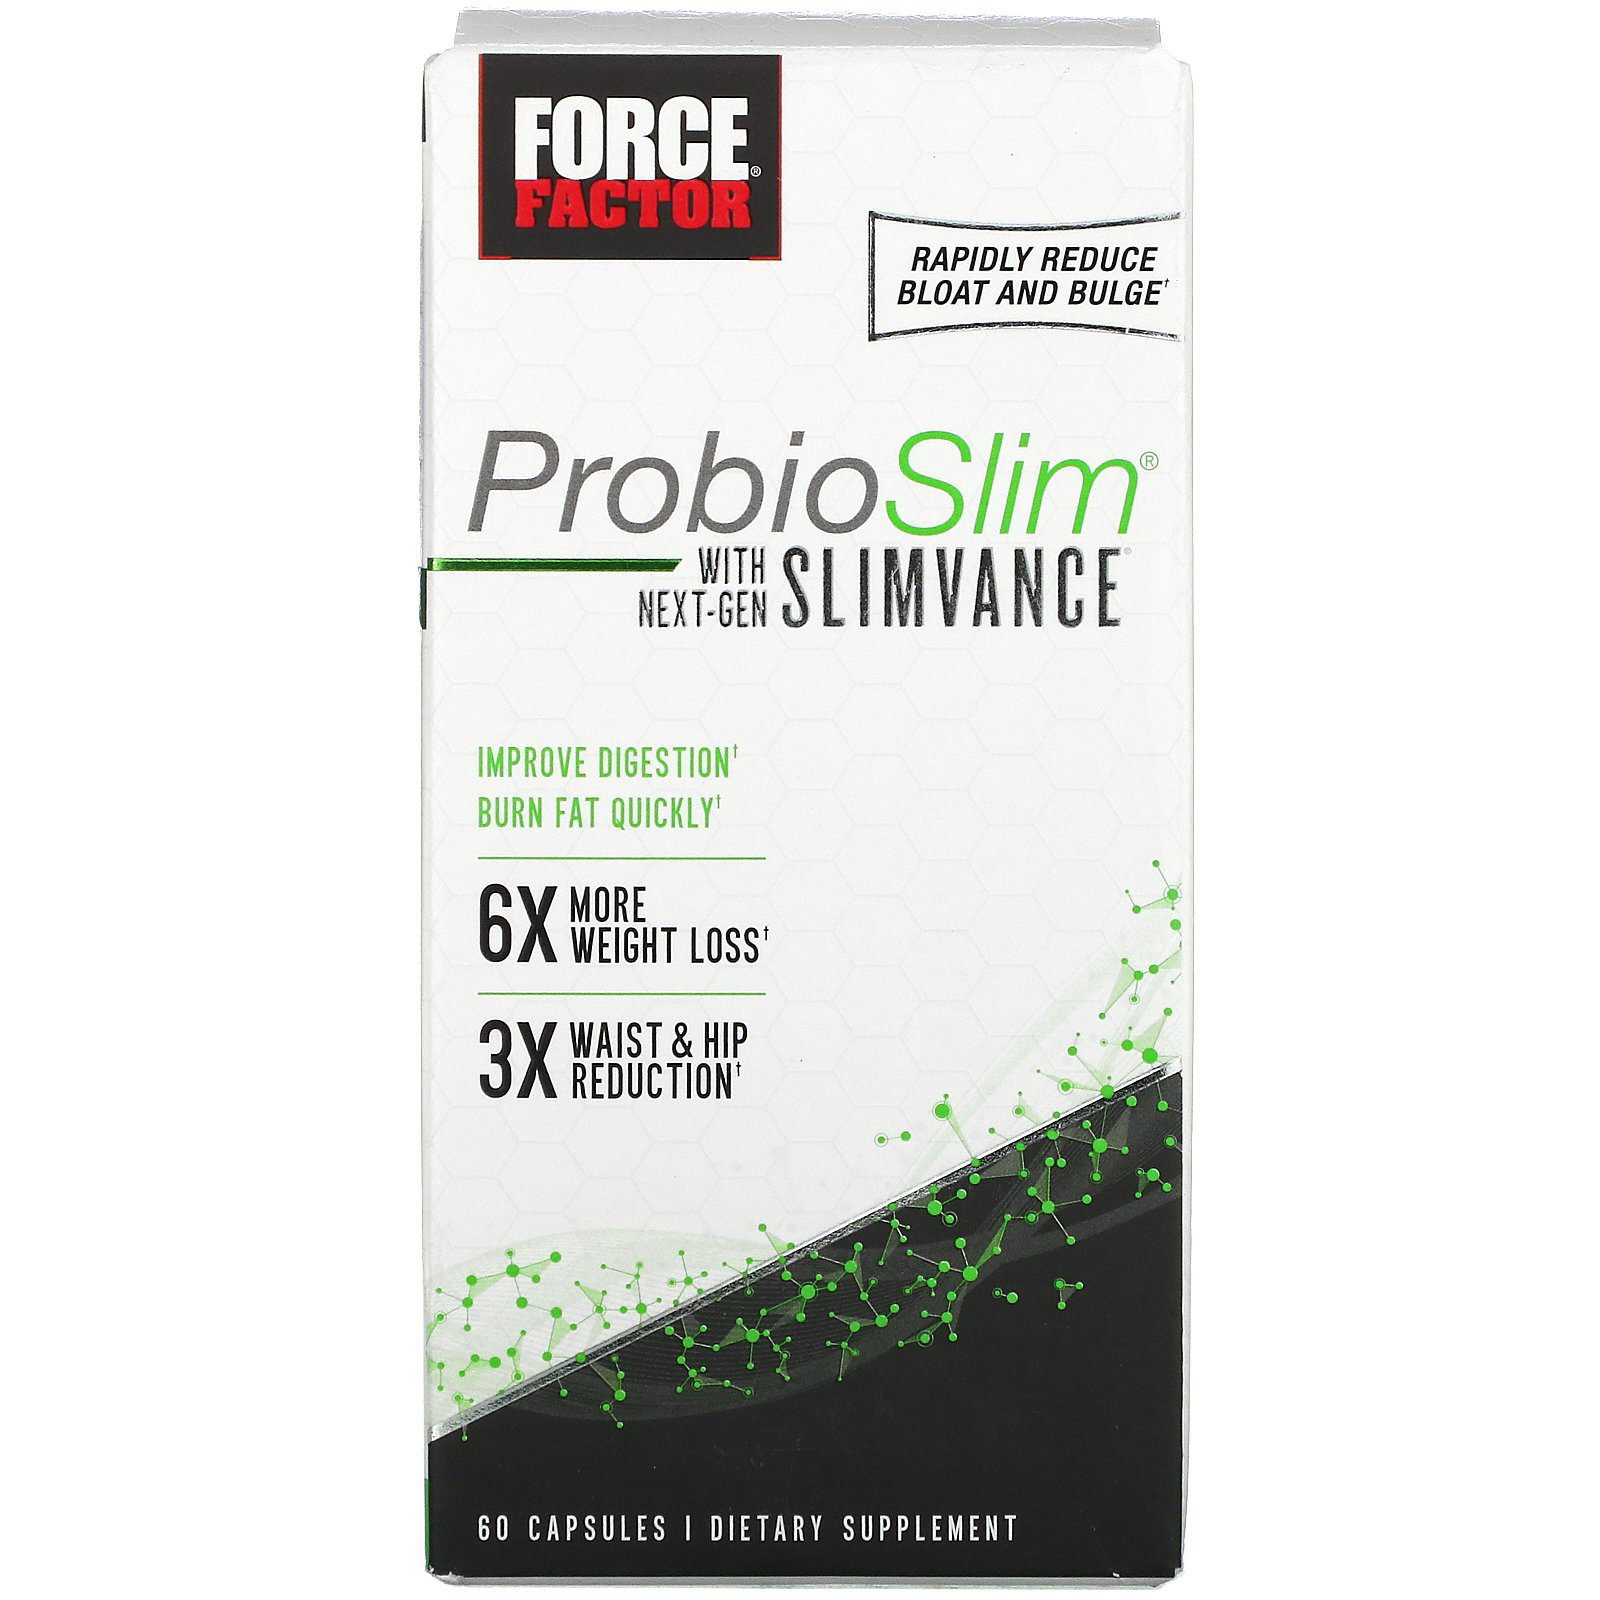 Force Factor ProbioSlim Probiotic and Weight Loss Supplement for